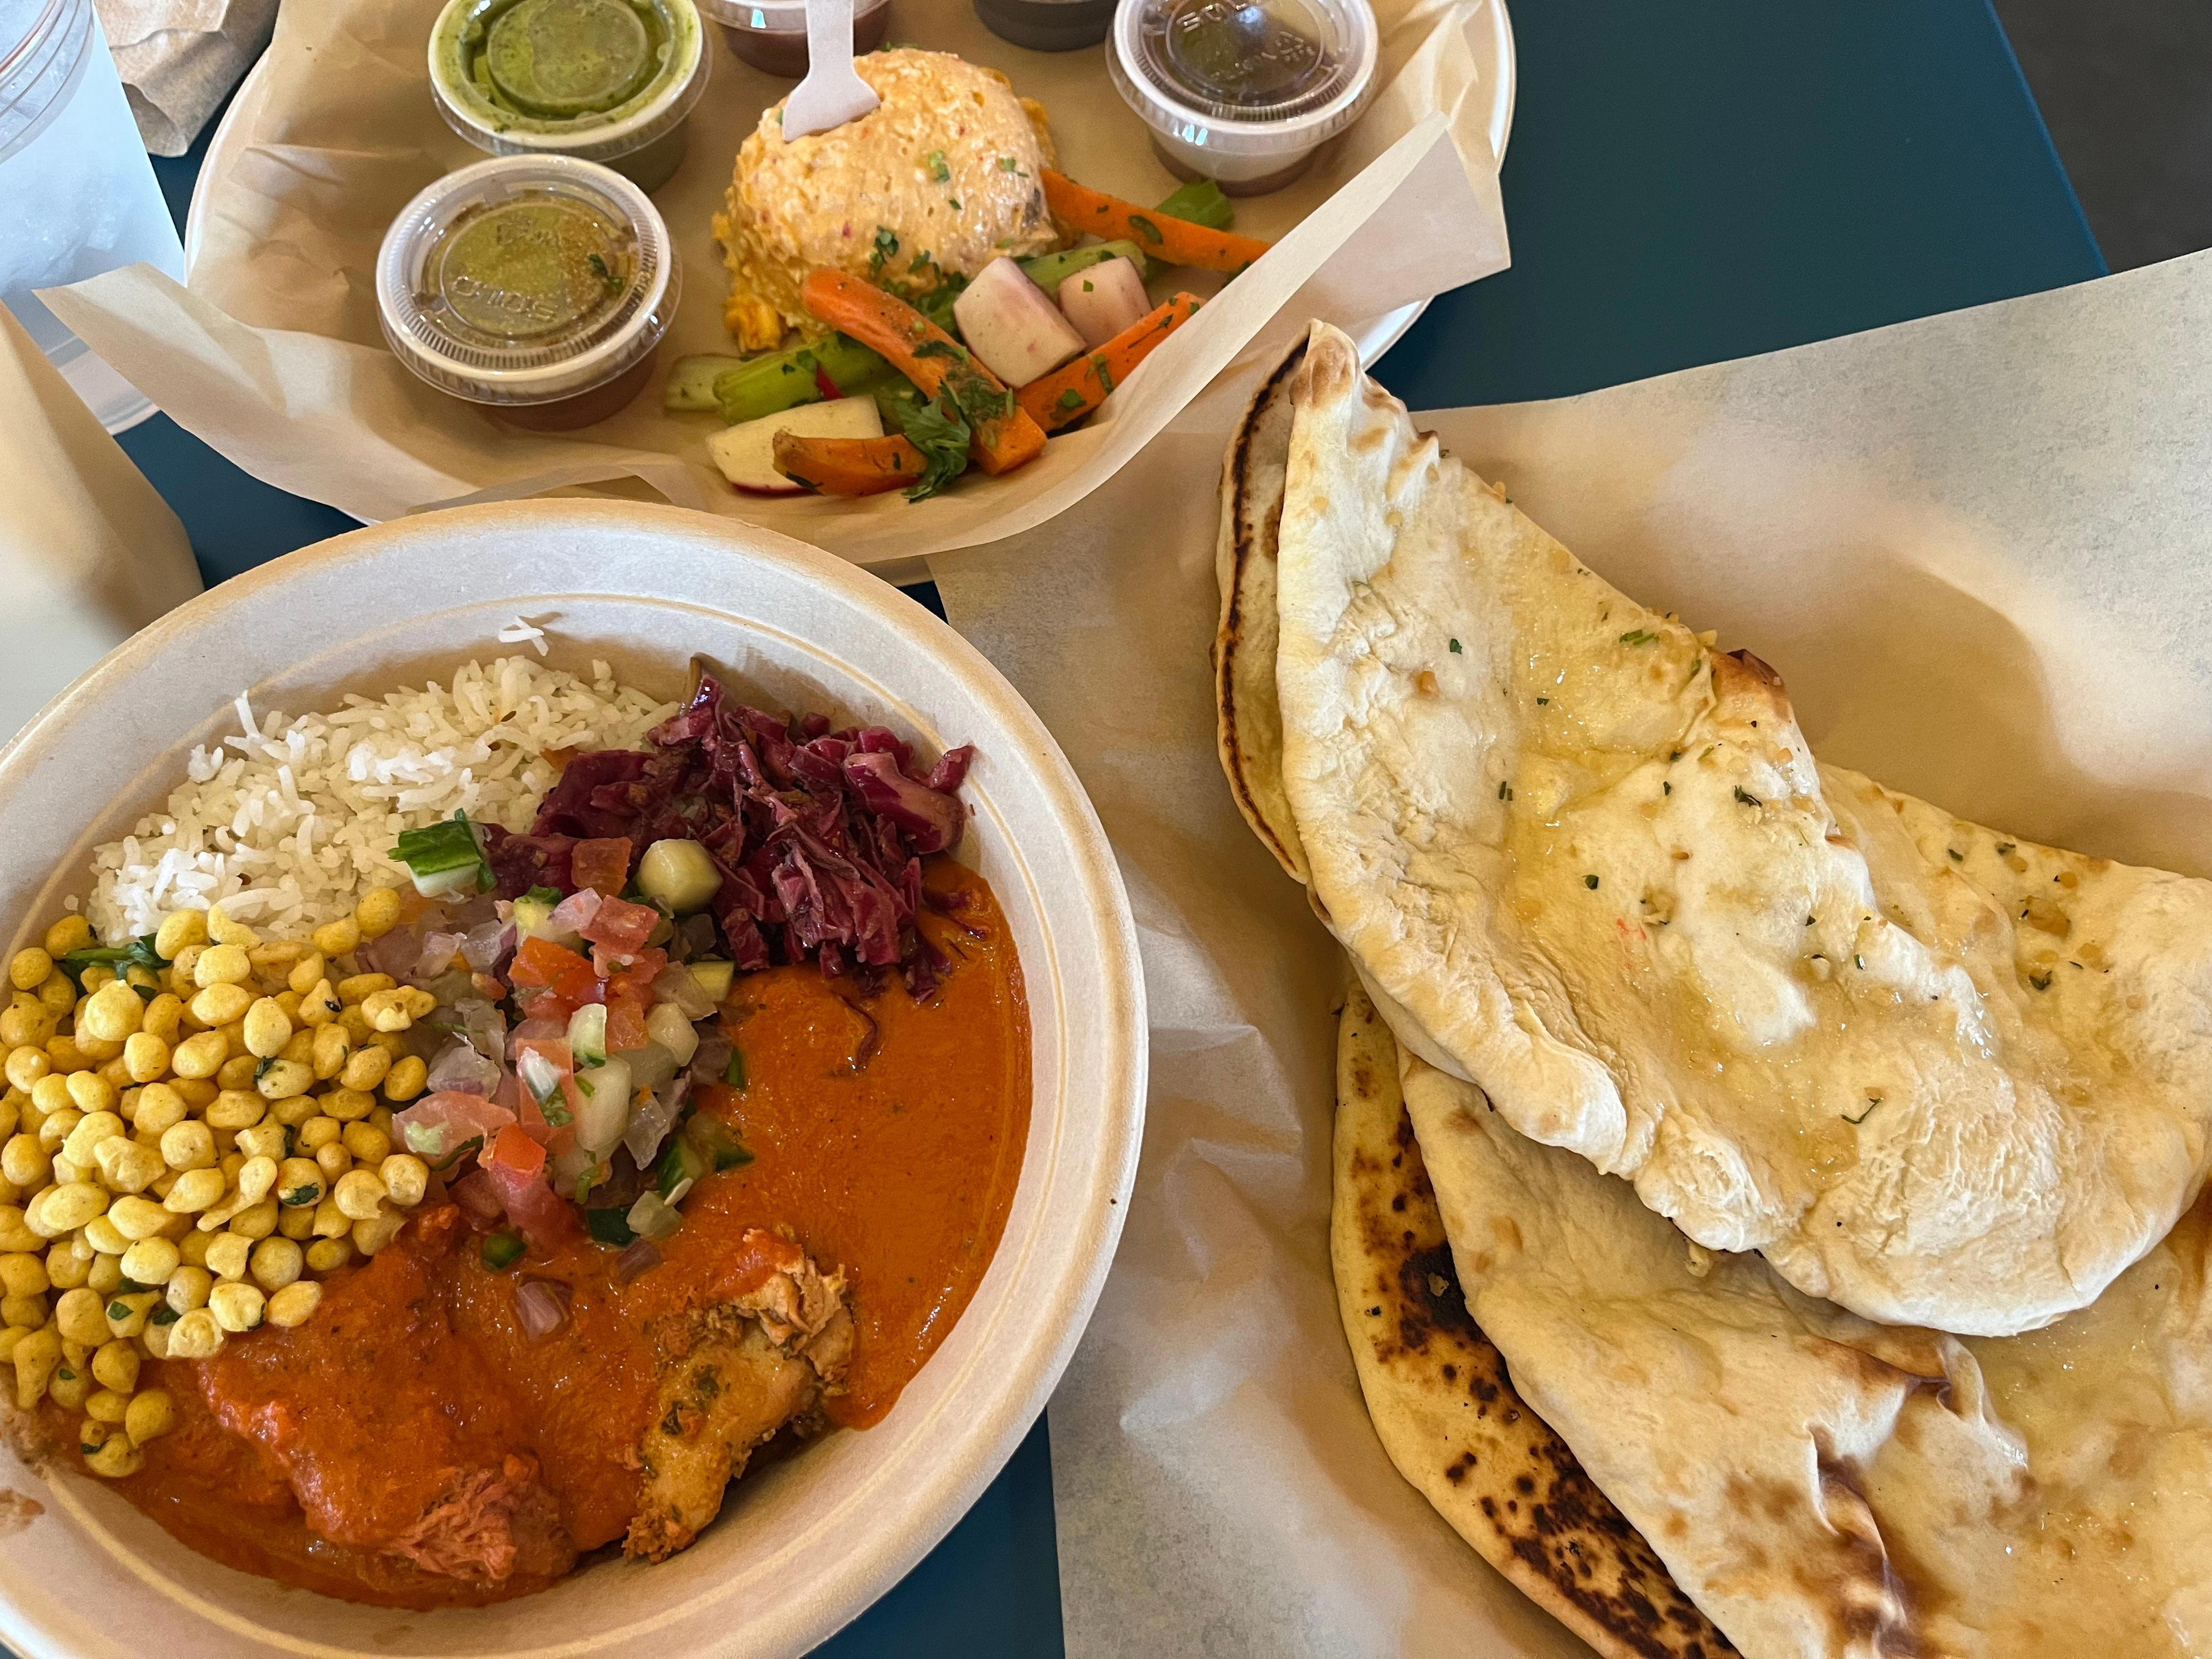 <p><span>Disney Springs has no shortage of restaurants, but one of the newest is eet by Maneet Chauhan. The </span><a class="" href="https://www.businessinsider.com/gordon-ramsay-fish-and-chips-restaurant-new-york-city-review-2023-1"><span>celebrity chef-owned restaurant</span></a><span> highlights a menu of modern, Indian-inspired cuisine.</span></p><p><span>It's quickly become my new favorite spot to eat in the shopping, dining, and entertainment district. </span></p><p><span>I love the bread service ($20), which comes with naan, a variety of chutneys, pickled veggies, and pimento-flavored whipped paneer. I think it rivals the famous </span><a class="" href="https://www.businessinsider.com/adults-trying-sanaa-is-it-worth-it-disney-world-review-2022-8"><span>bread service from Sanaa</span></a><span> at Animal Kingdom Lodge.</span></p>